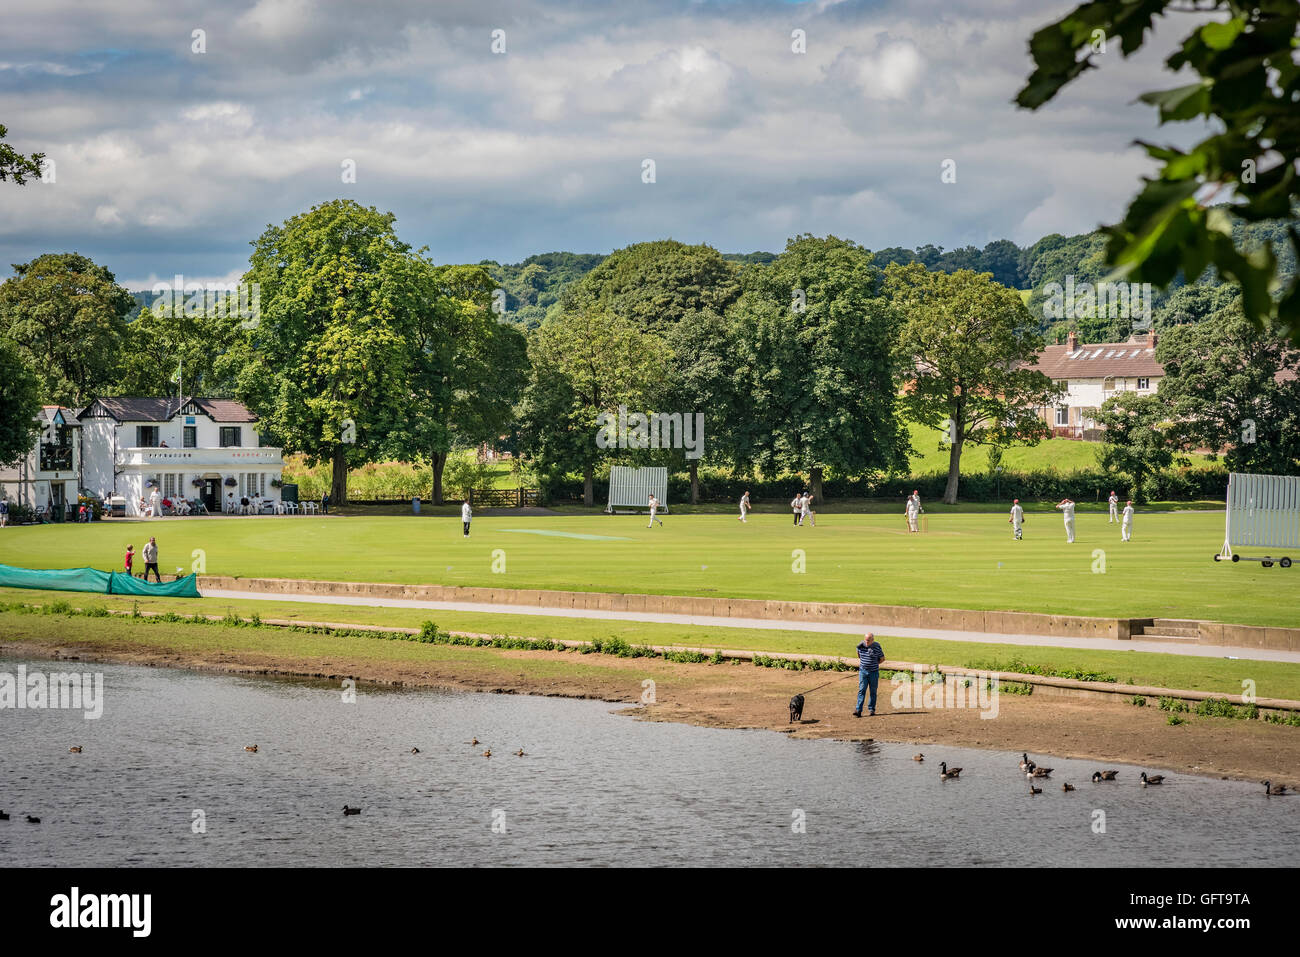 A cricket match being played at Saltaire Cricket Club in Roberts Park by the river Aire in Saltaire West Yorkshire. Stock Photo